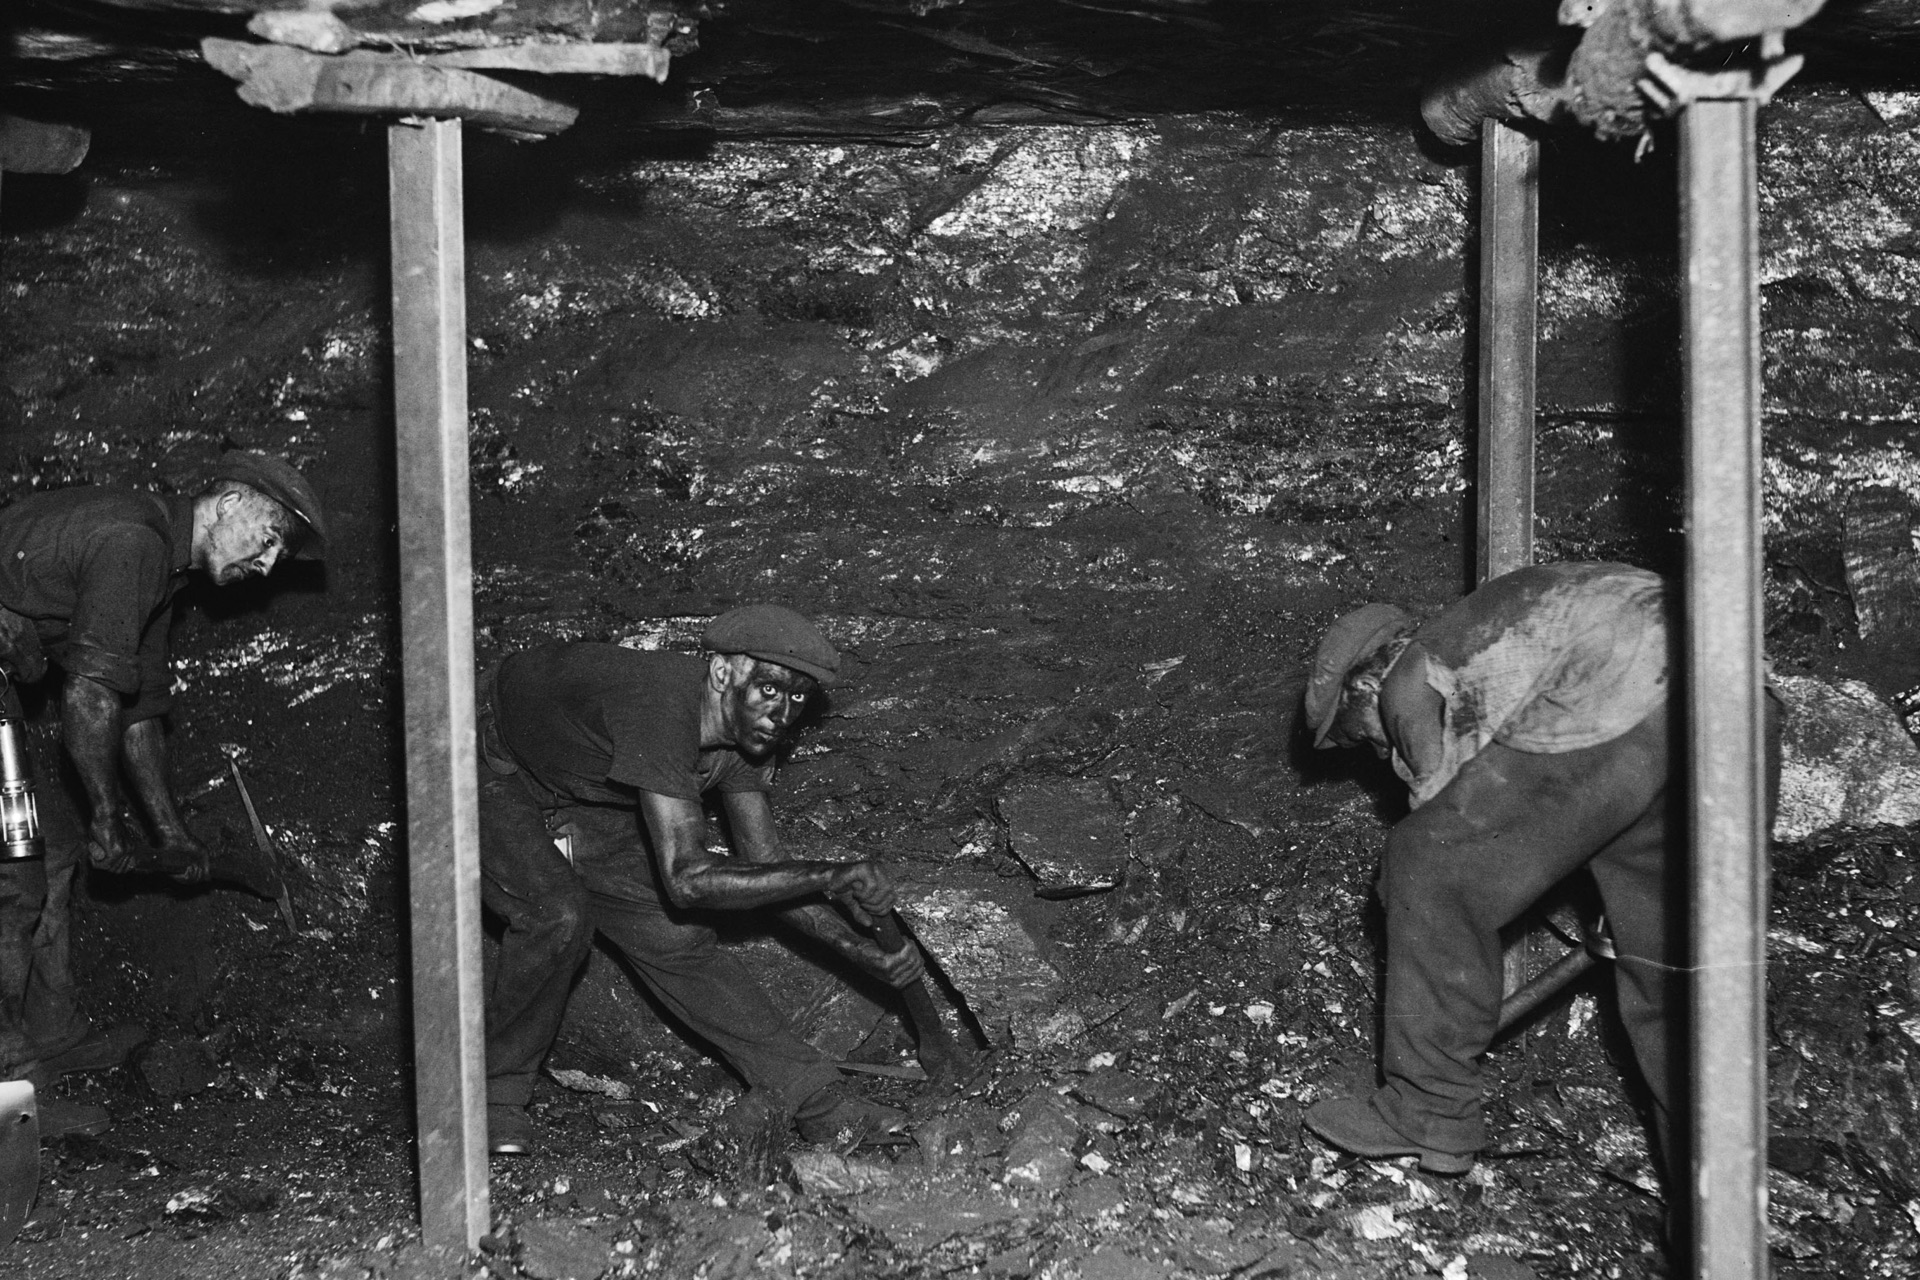 Coal mining, Definition, History, Types, & Facts